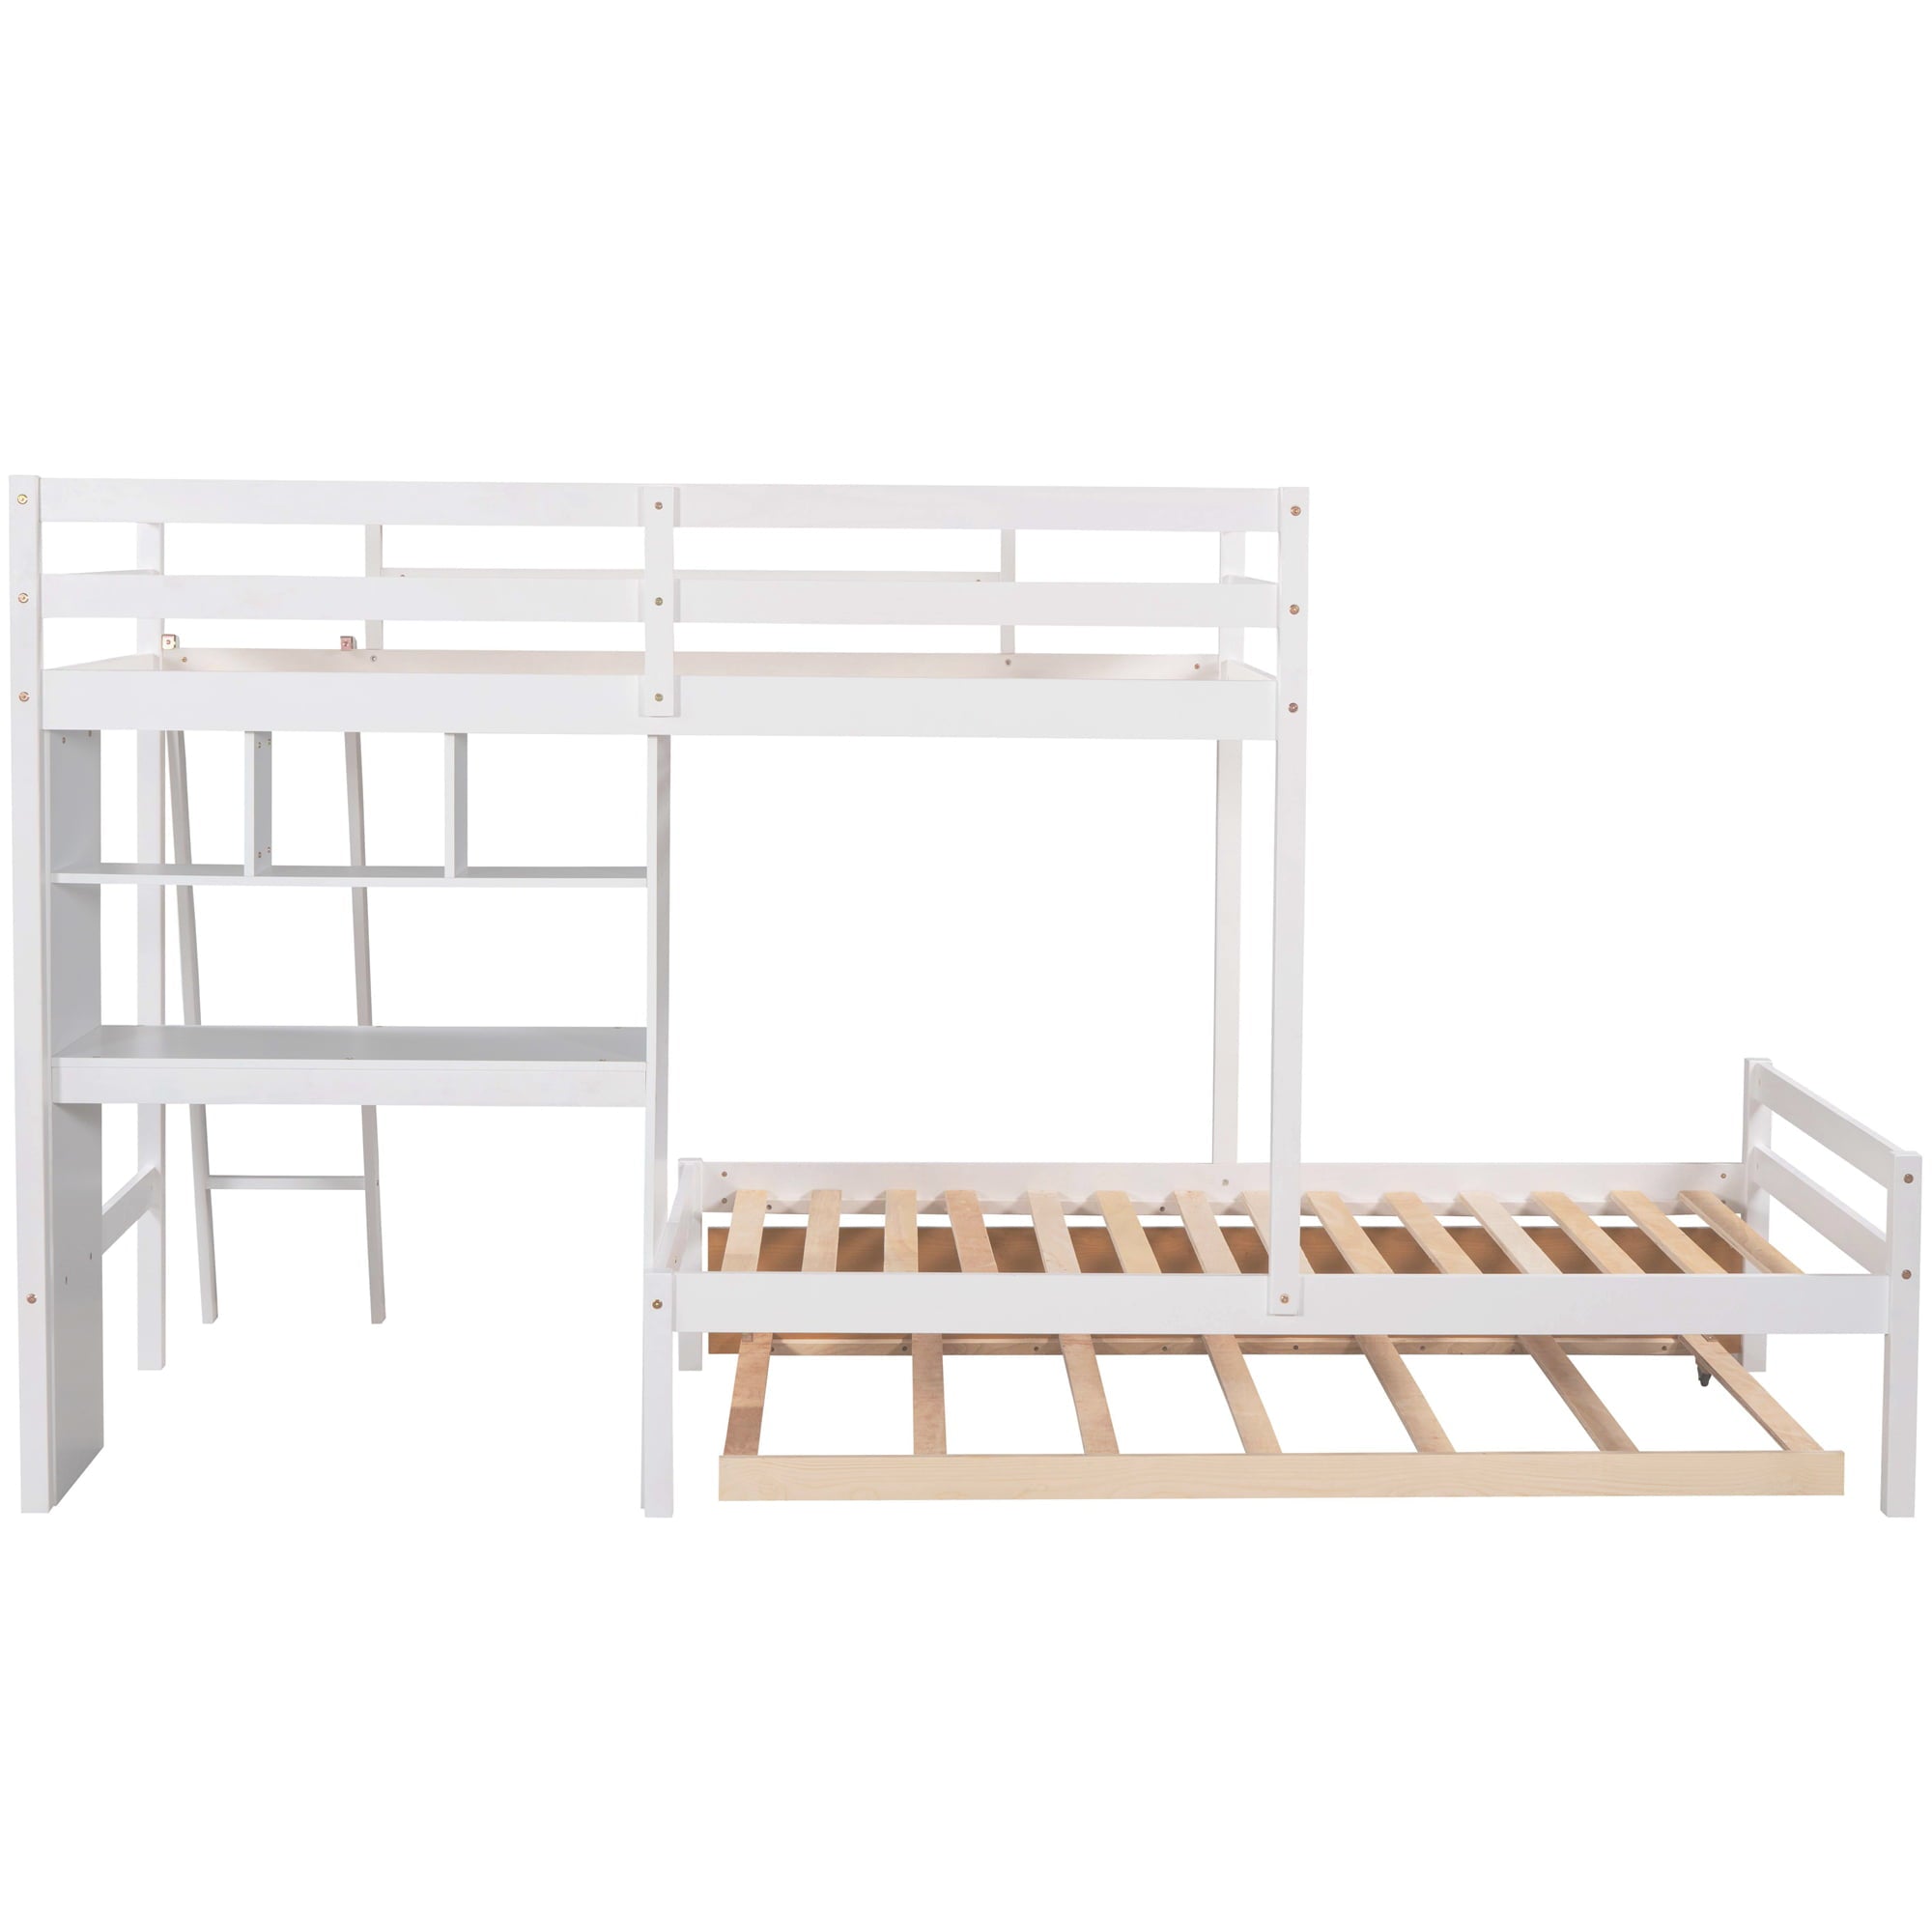 EUROCO Twin over Twin Bunk Bed with Desk and Trundle for Kids Bedroom, White